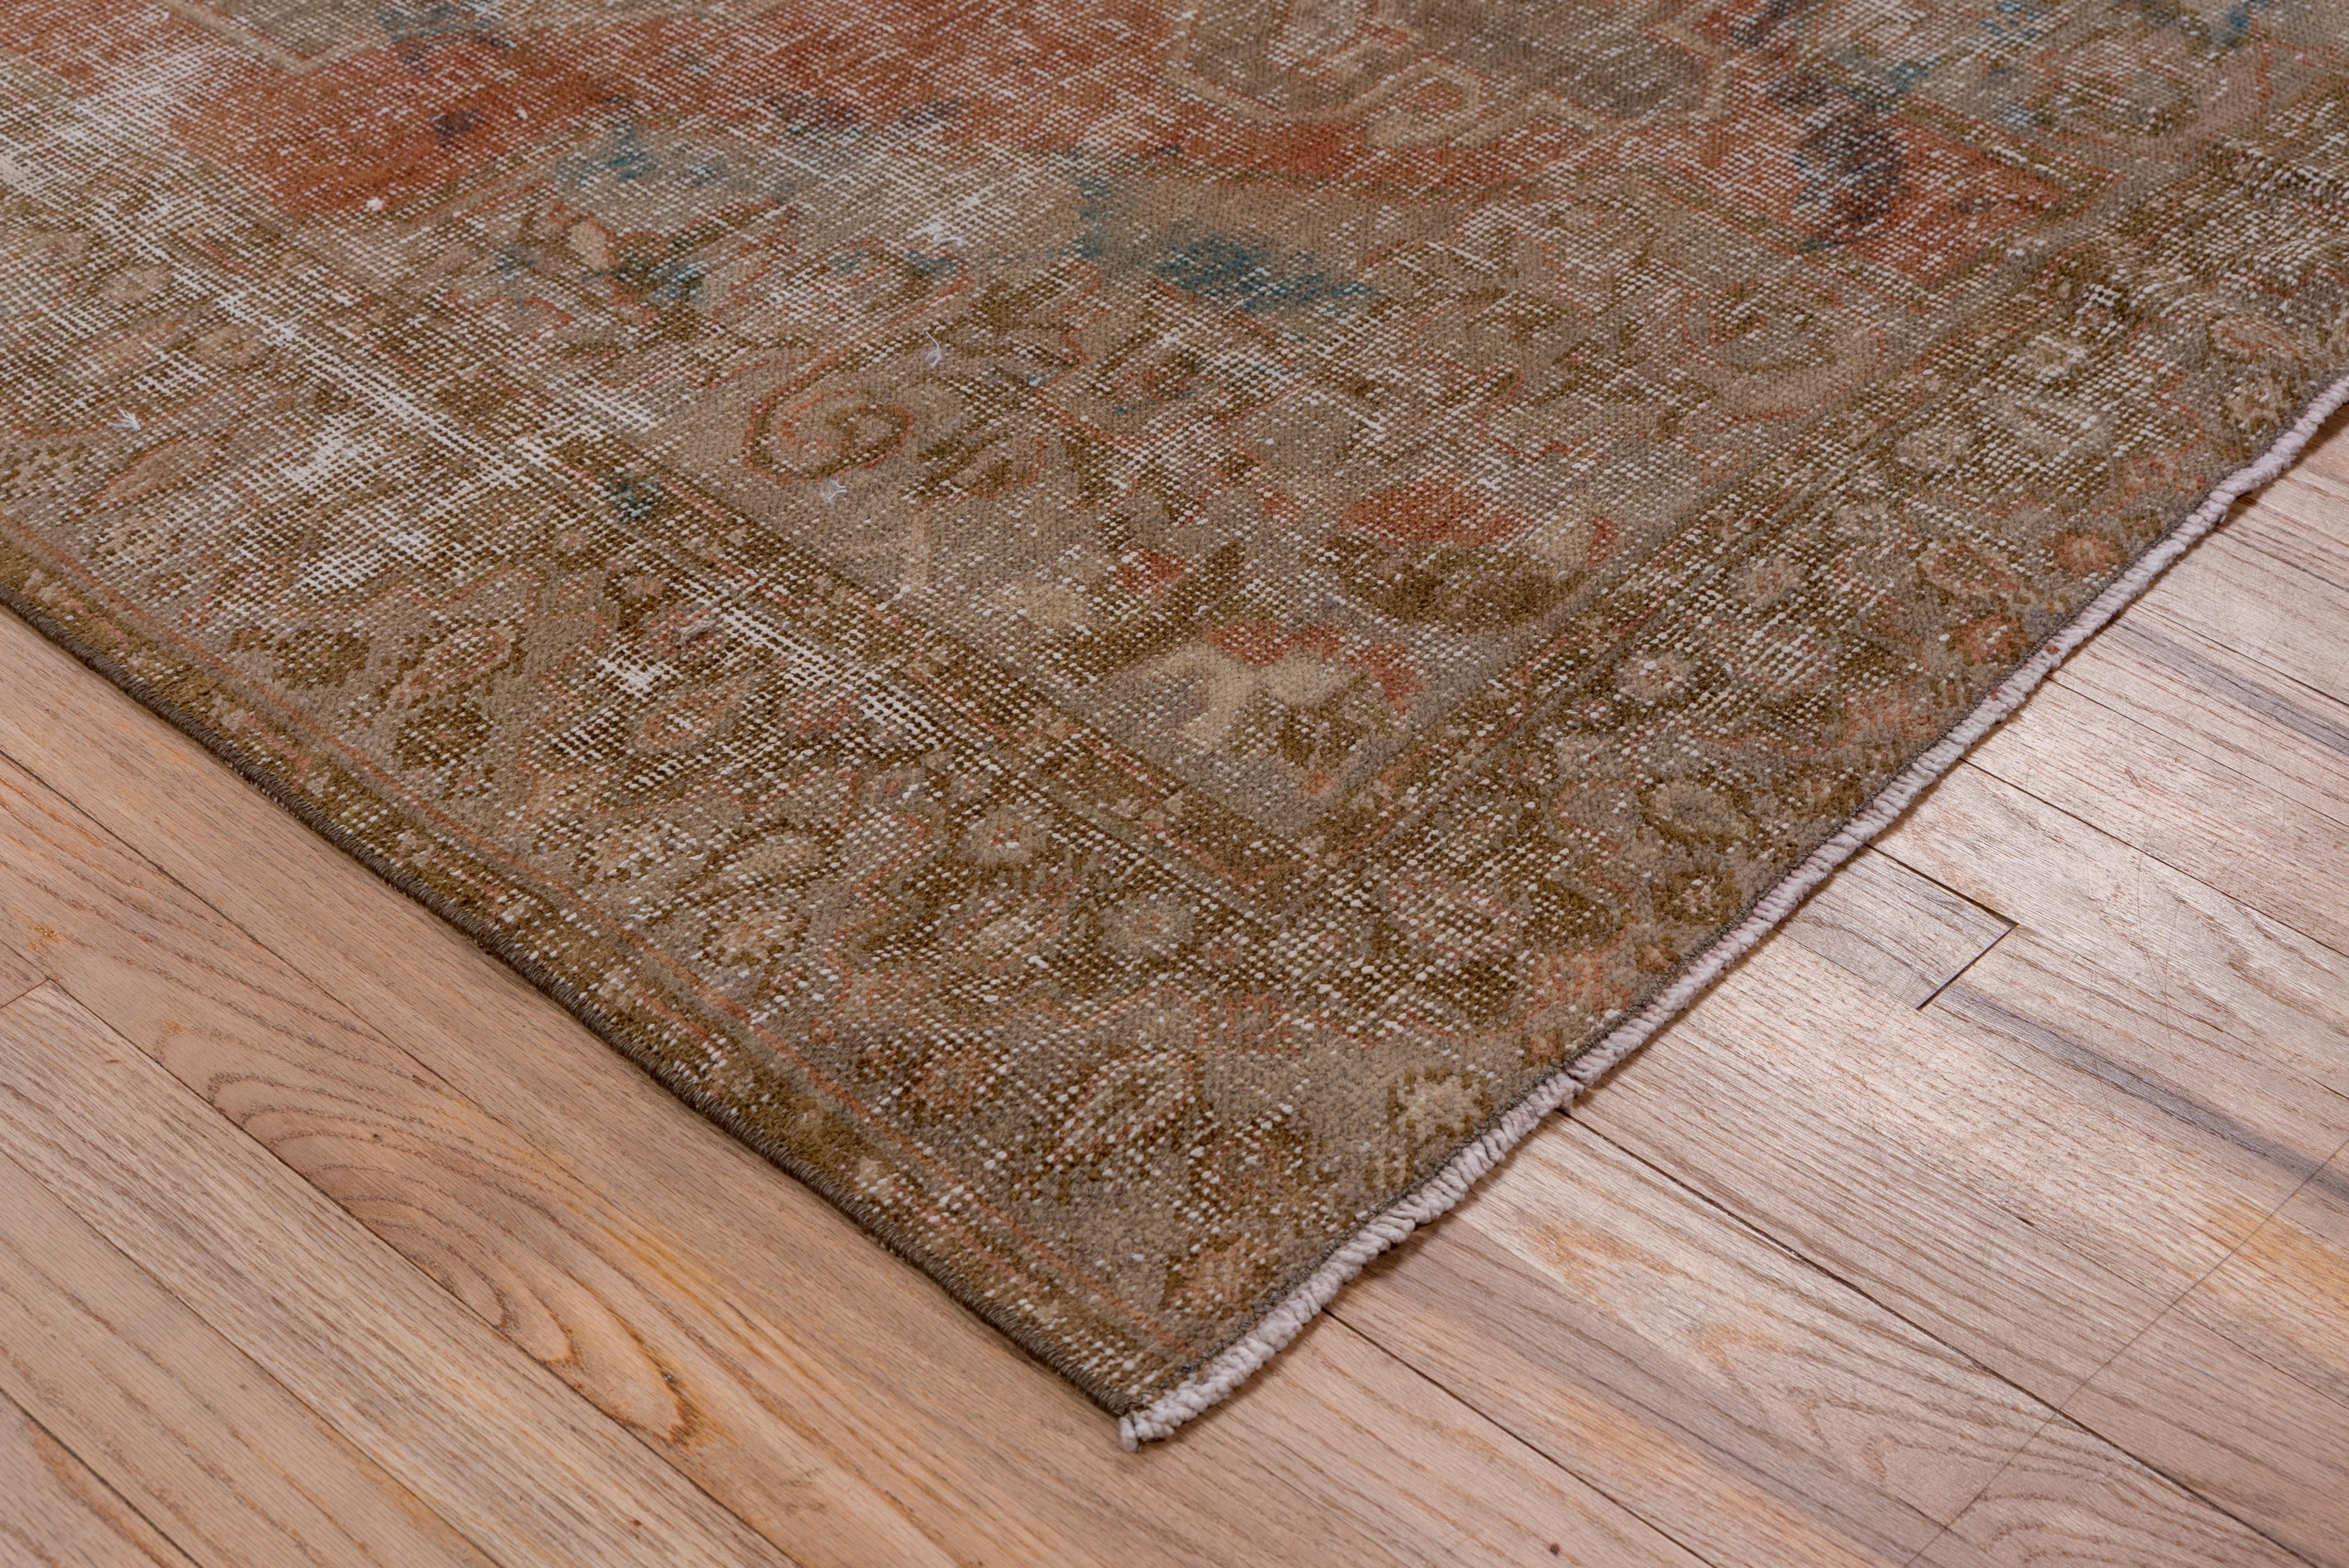 This scatter Oushak shows the remains of a medallion, pendants and corners, and an equally worn main border. The light foundation adds an additional cloud-like tone. Rustic palette. Orange field.